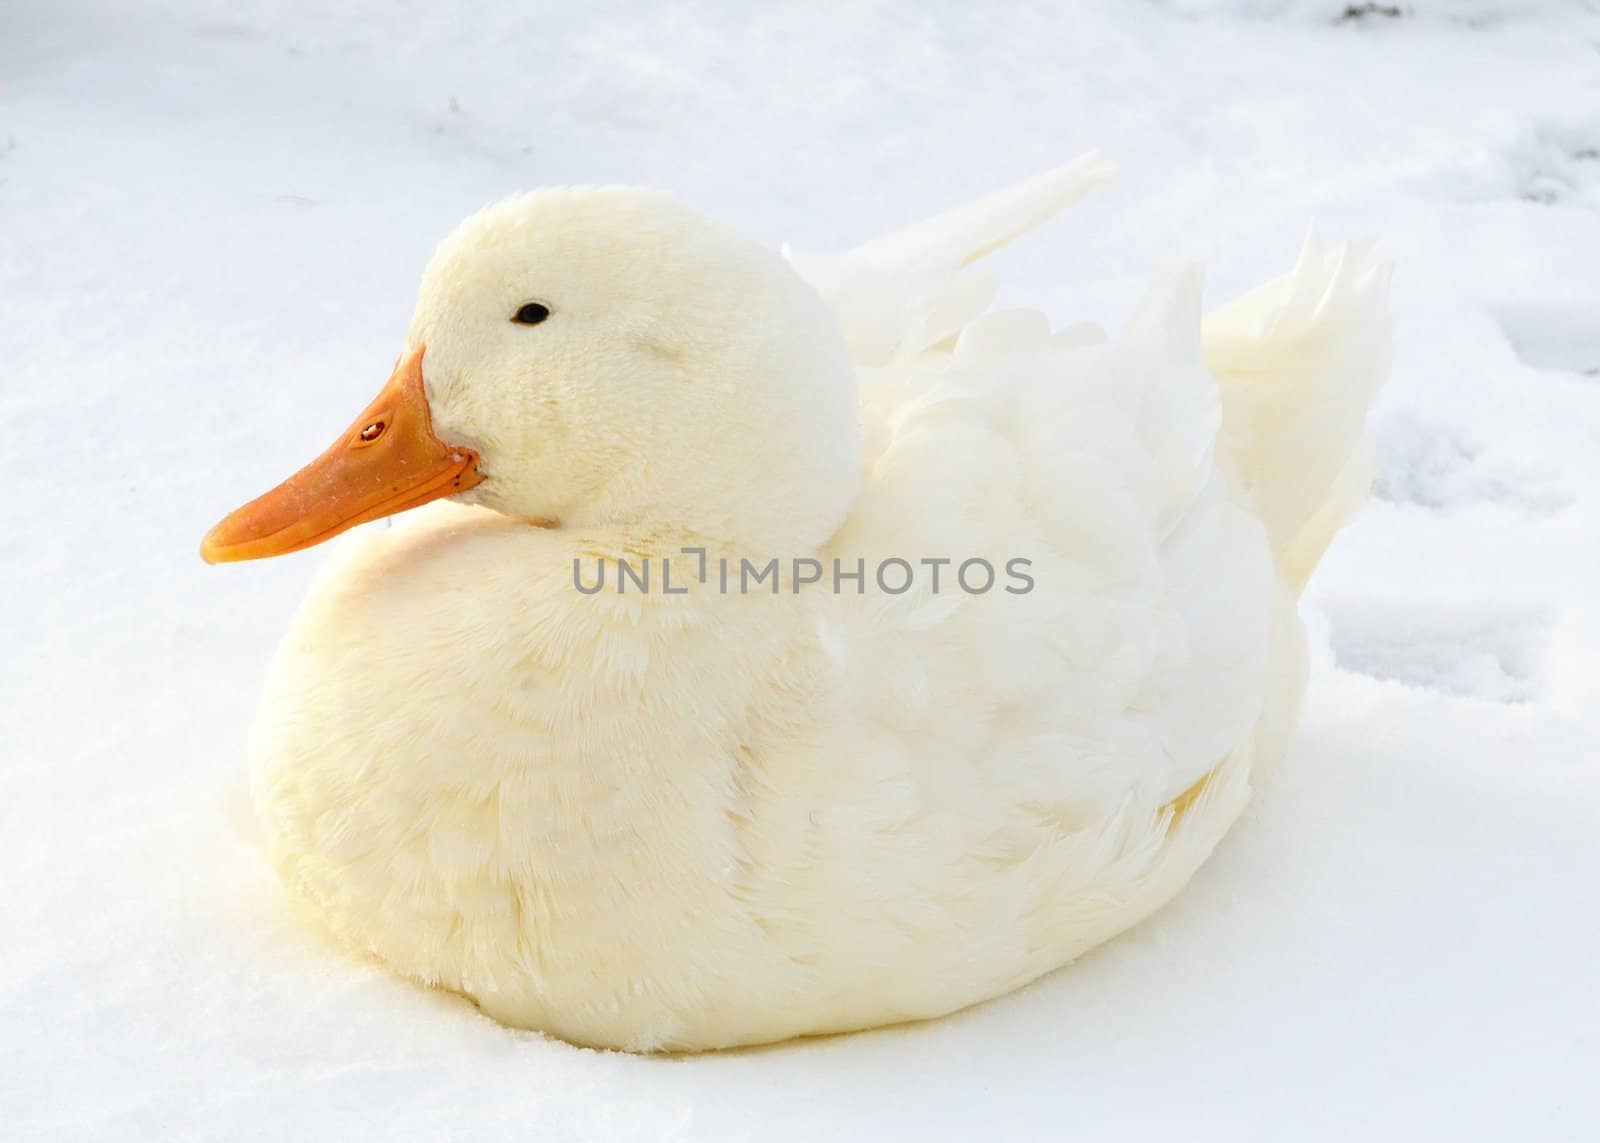 A White duck sitting in the snow.